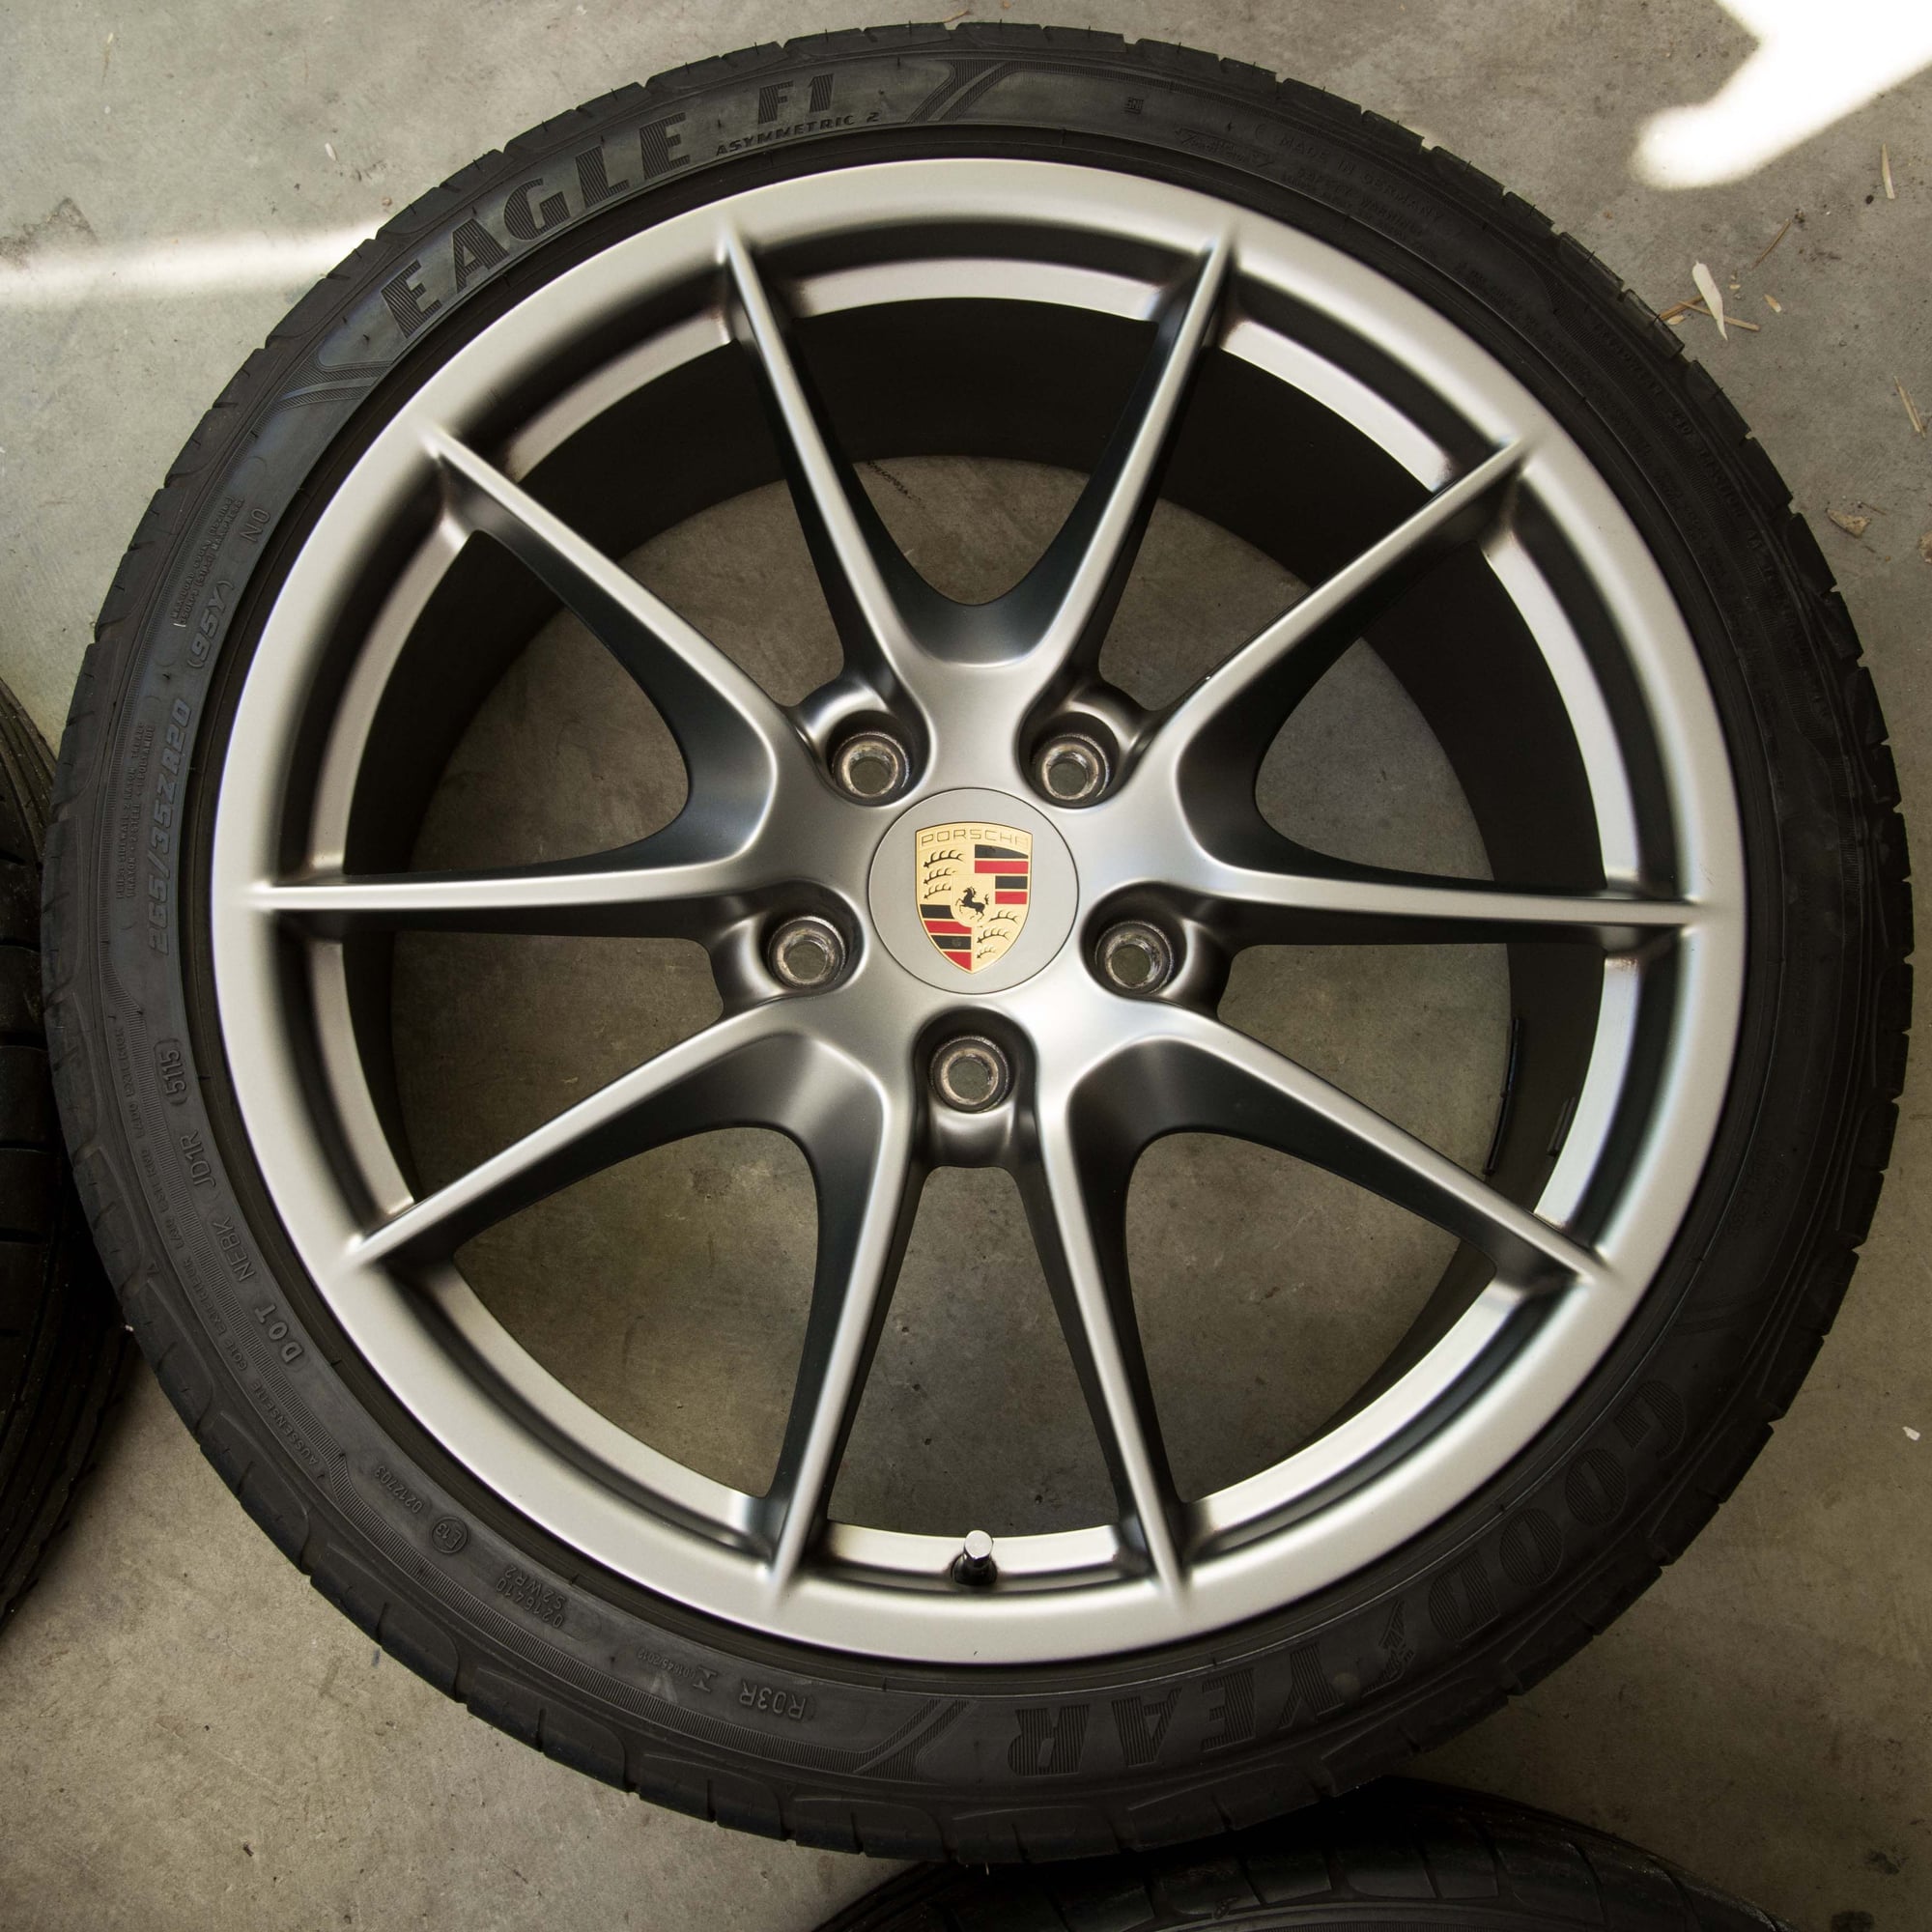 Wheels and Tires/Axles - Sold 20" OEM wheels & tires for 981 / 718 - Used - 2013 to 2018 Porsche Boxster - 2013 to 2018 Porsche Cayman - Bay Area, CA 94301, United States